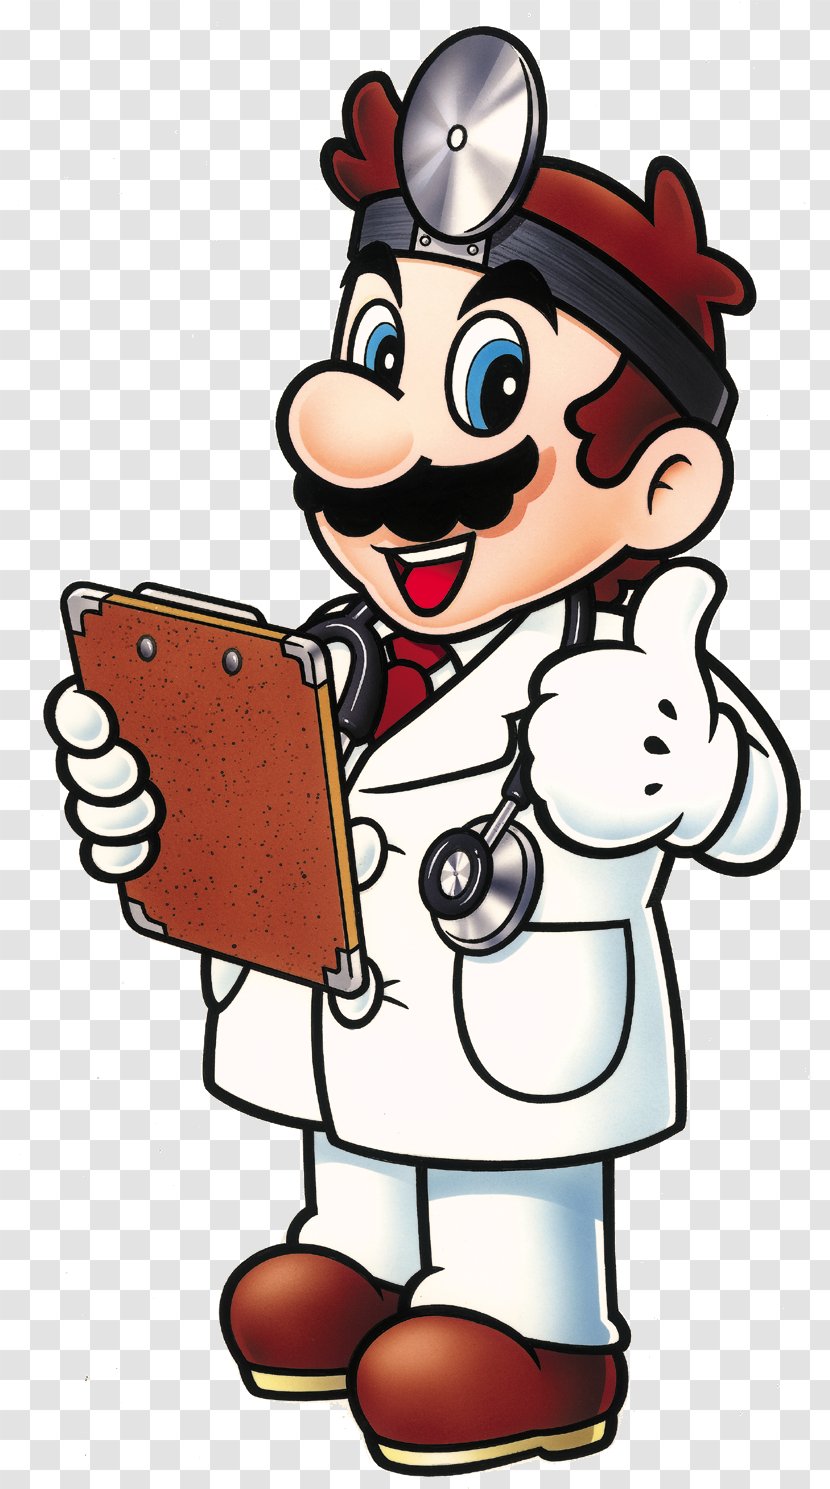 Dr. Mario 64 Mario: Miracle Cure Super Video Games - Nintendo Entertainment System - Cartoon Dr Transparent PNG